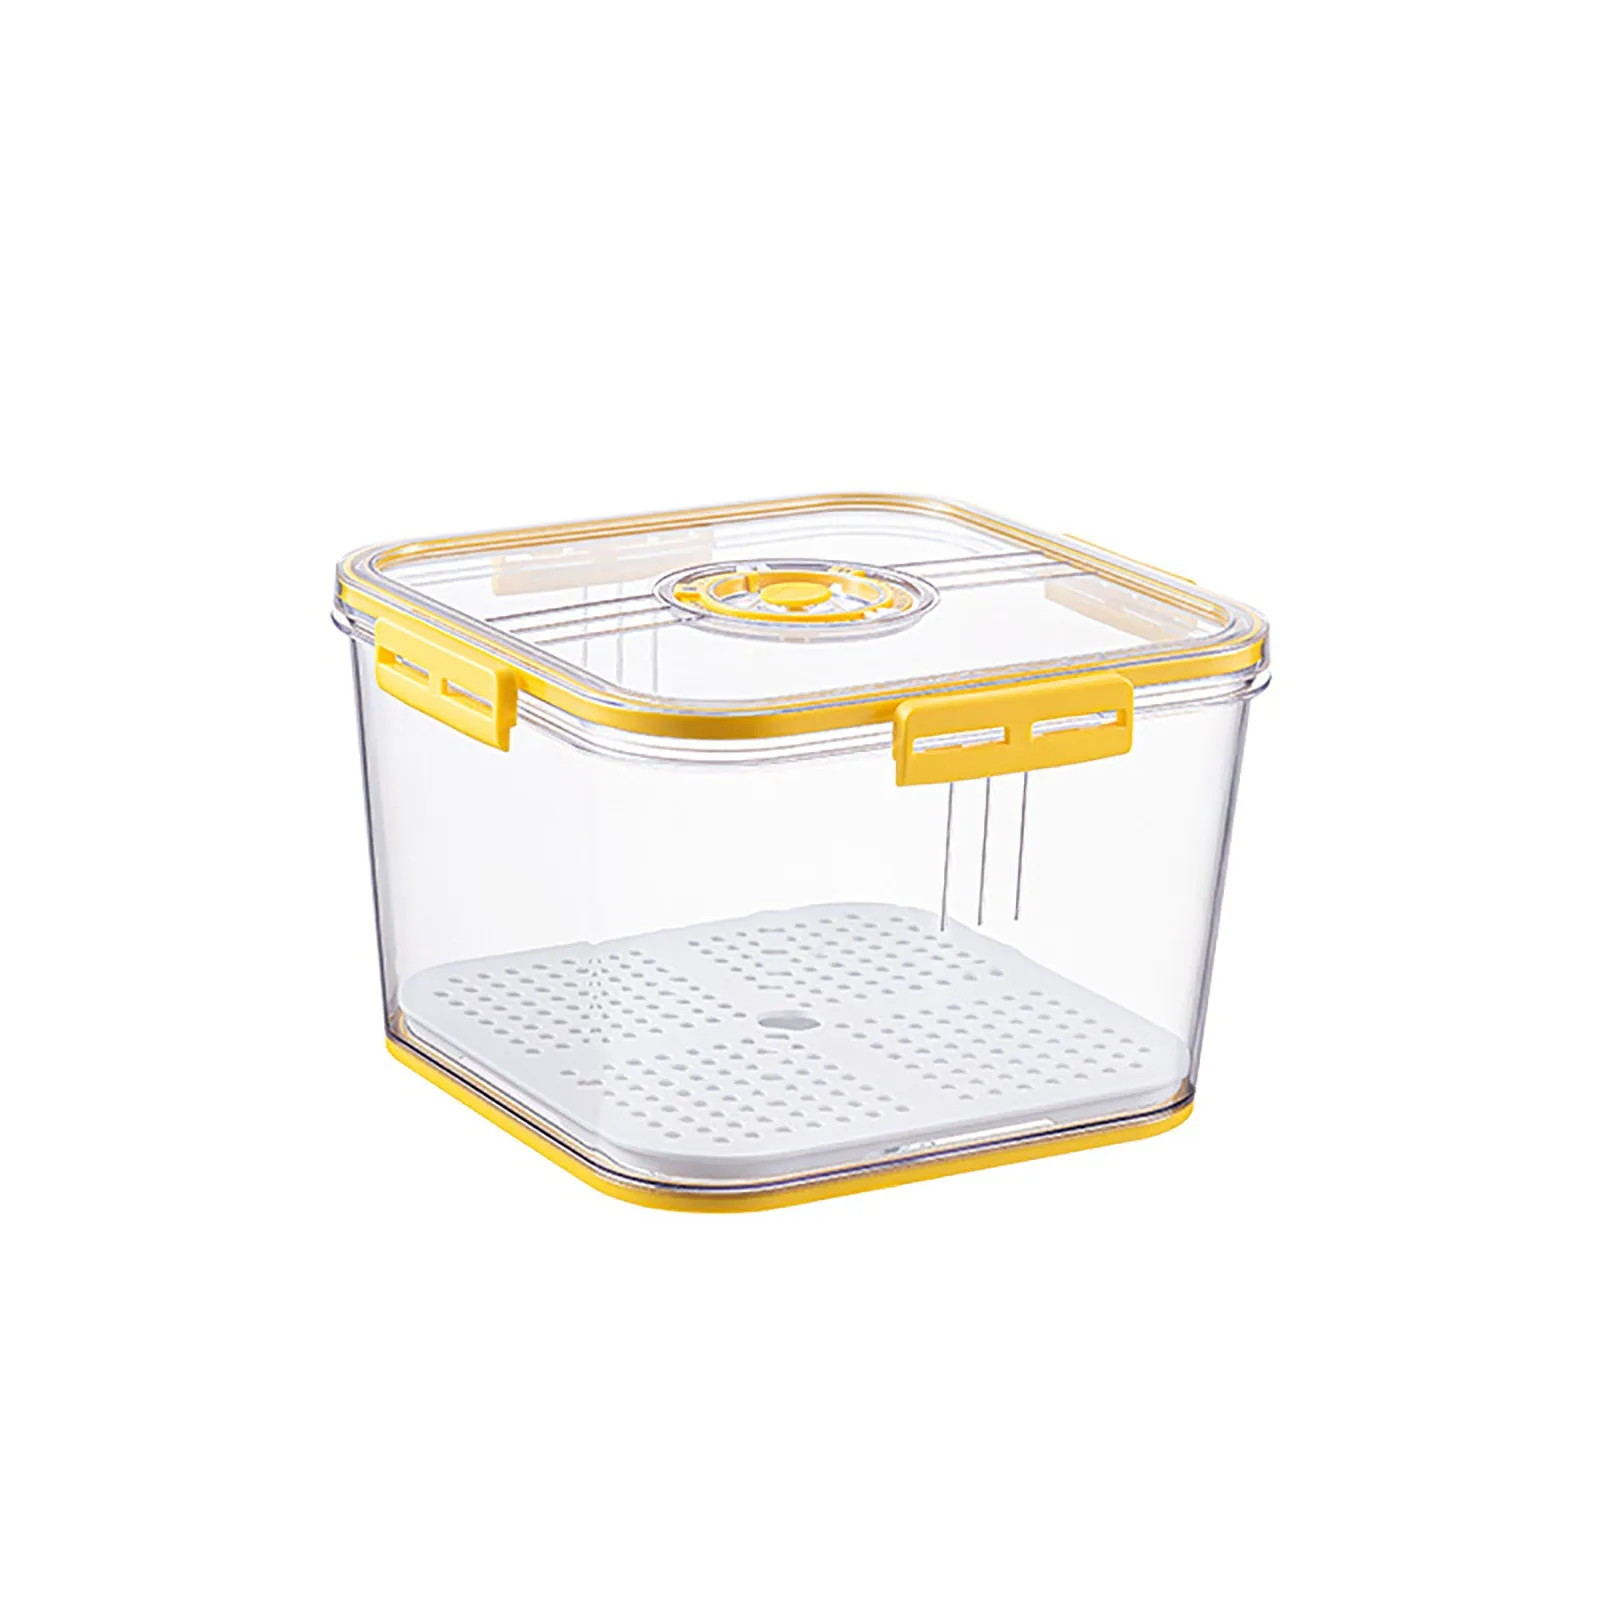 

Clear Plastic Lunch Box Fresh Produce Vegetable Fruit Storage Containers With Time Recording Fridge Storage Container Container